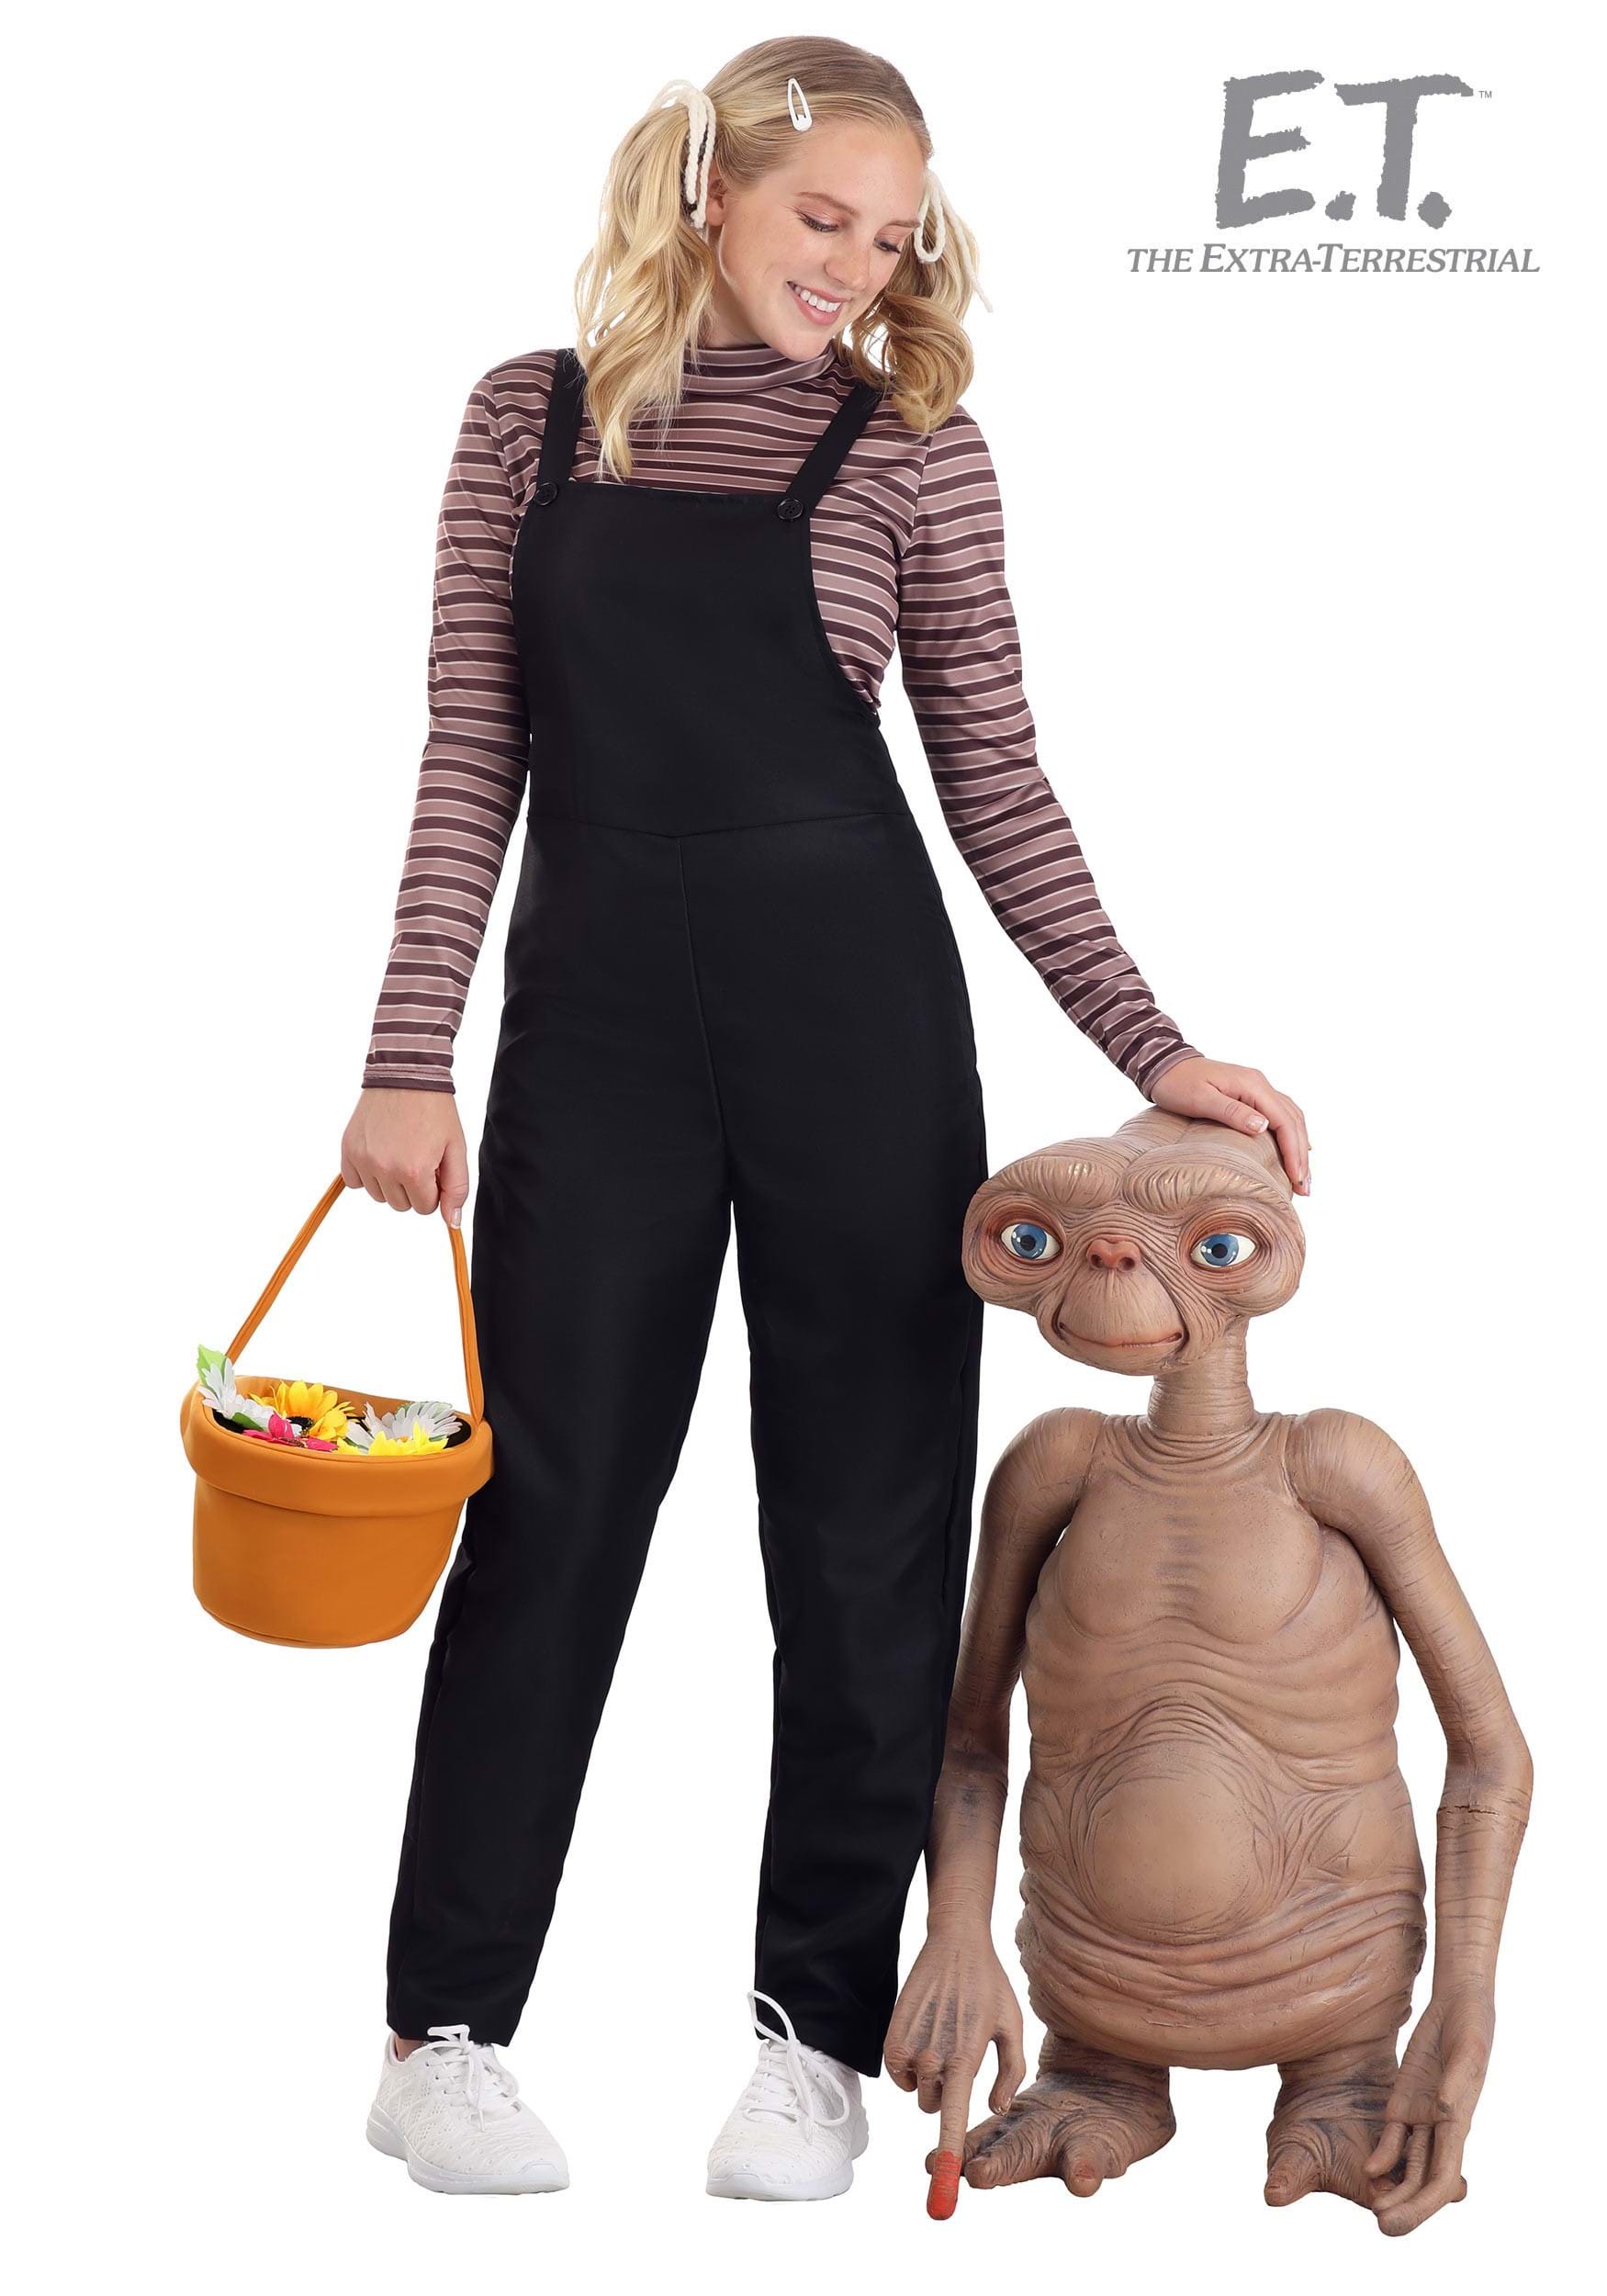 https://images.halloweencostumes.com/products/73892/1-1/womens-et-gertie-costume.jpg